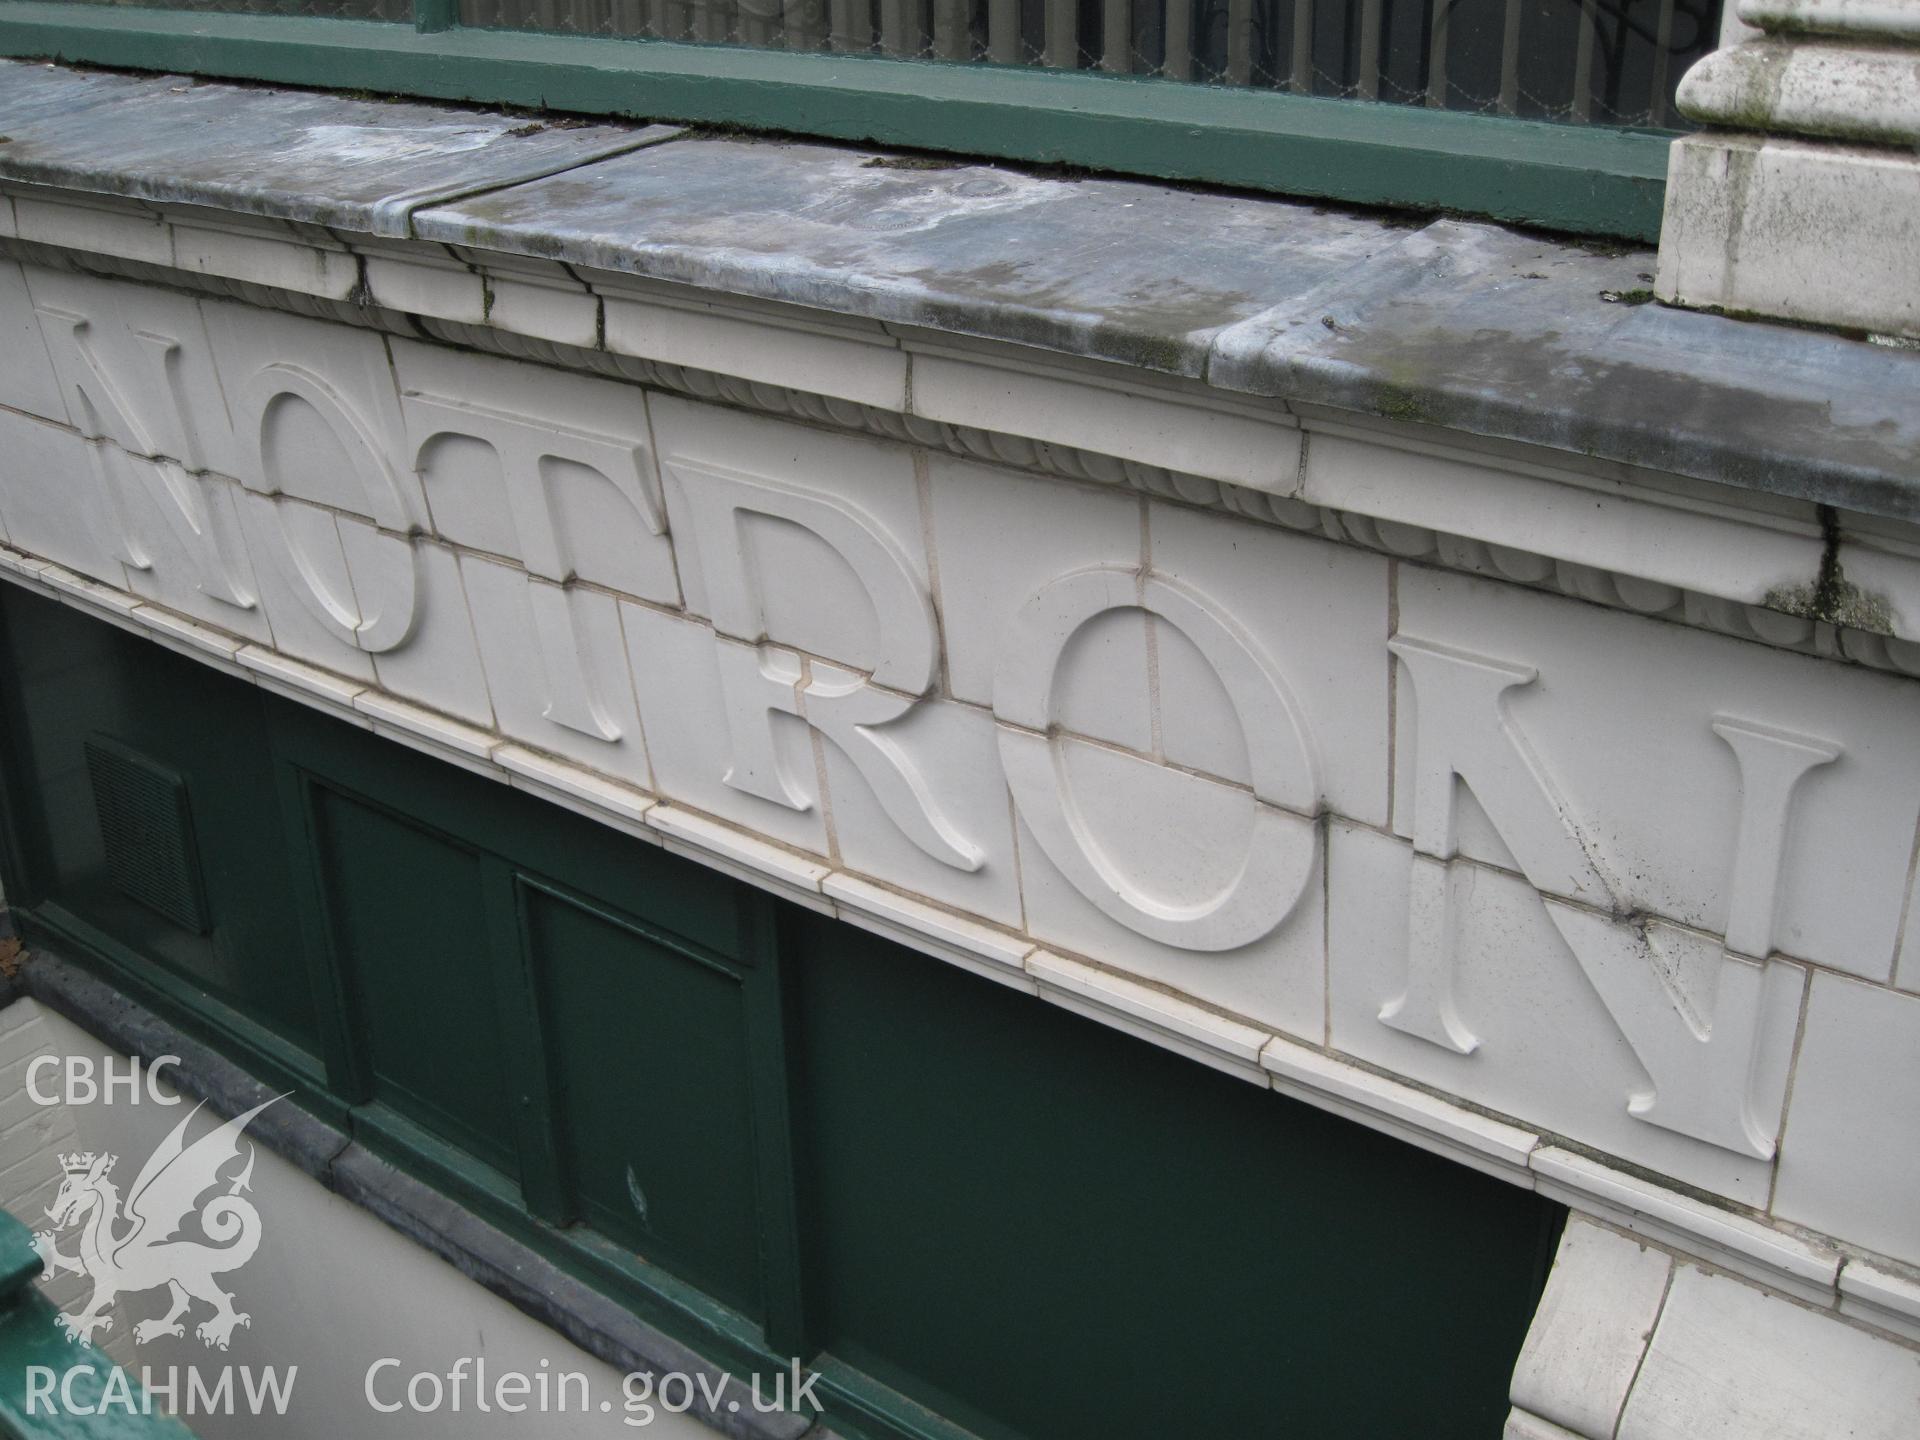 Detail of the trading name 'Notron' on the Princes Avenue facade of of the Automobile Palace.